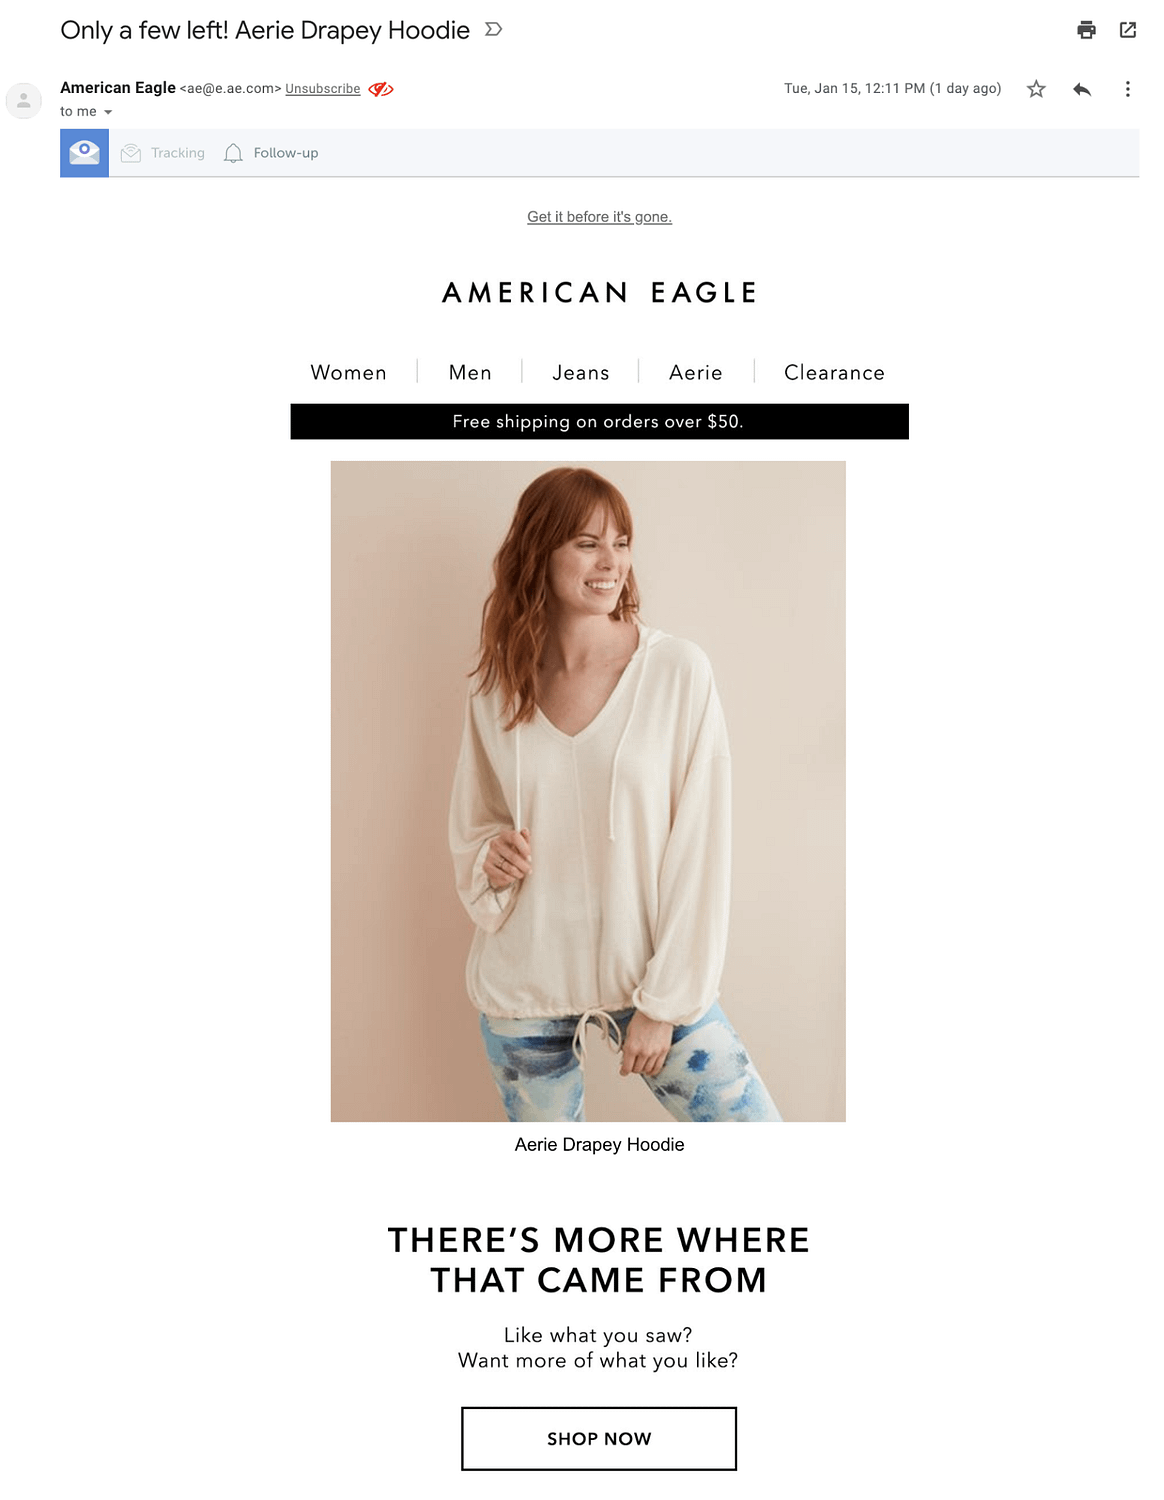 American Eagle's abandoned cart email